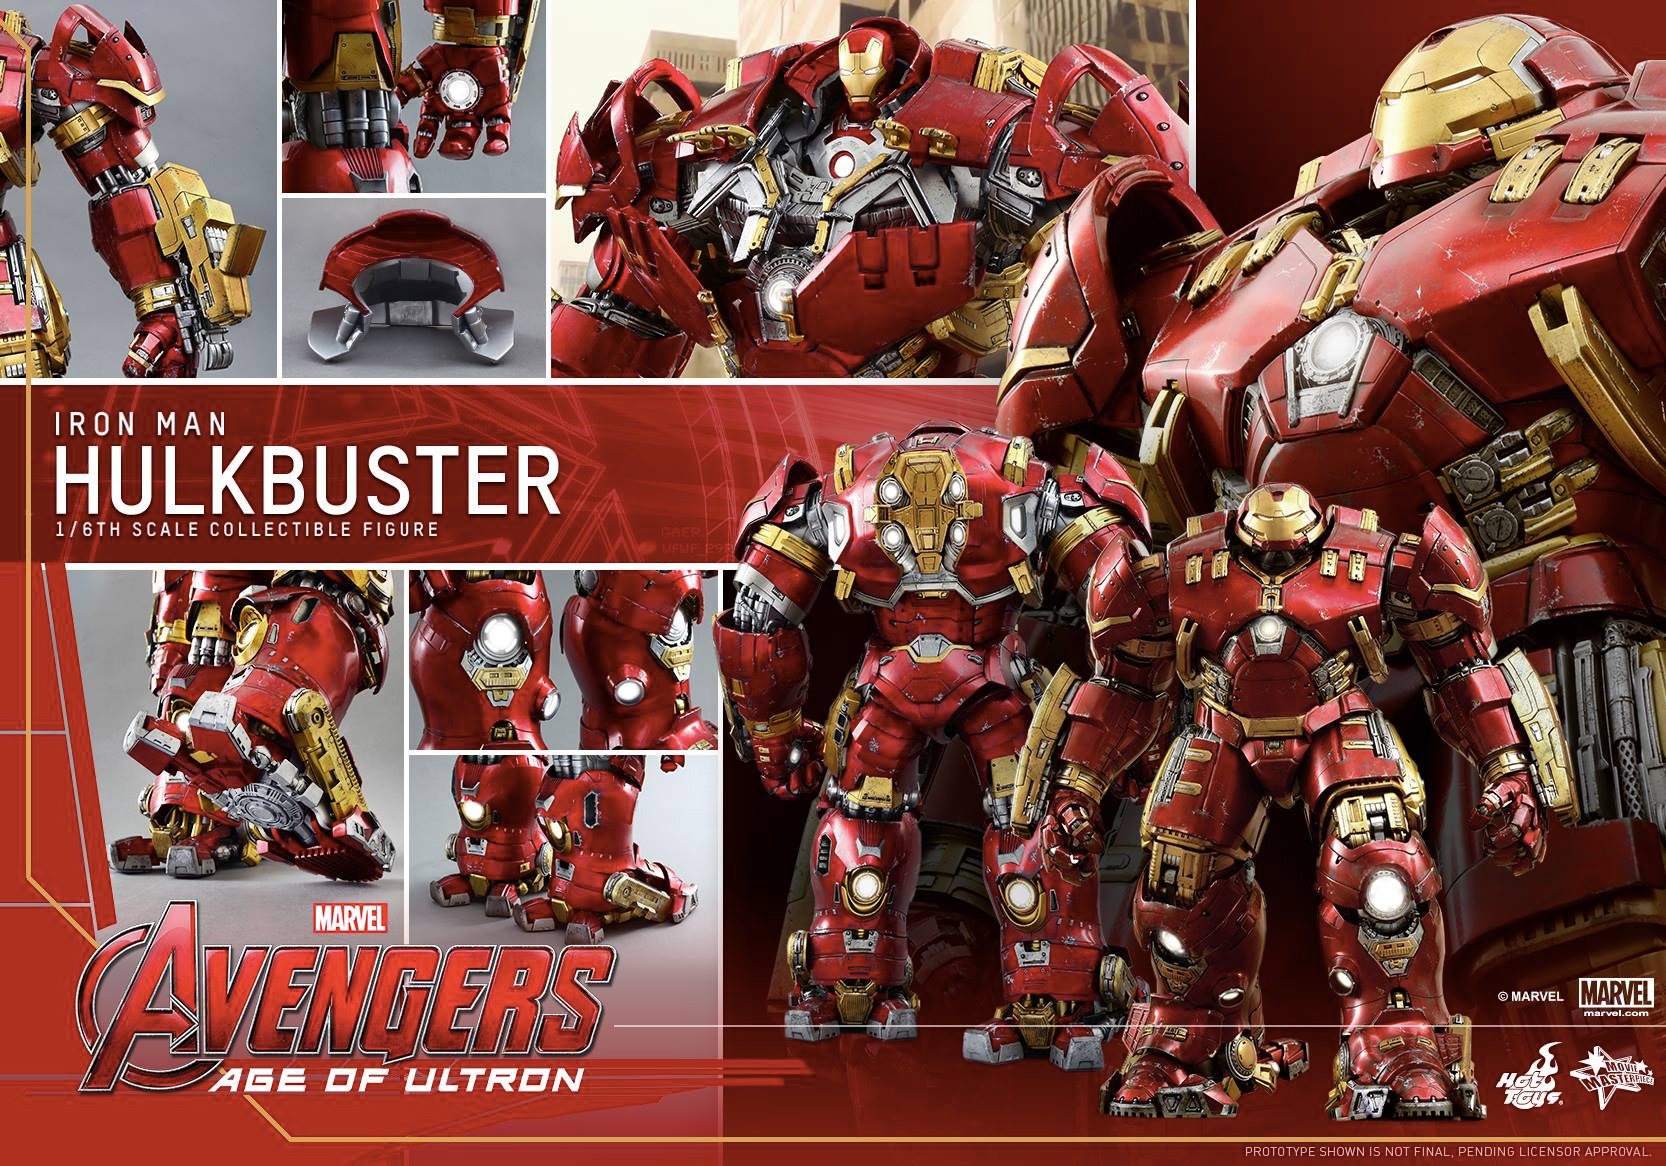 It Turns Out There’s Even A Tiny Iron Man Inside That Hulkbuster Figure